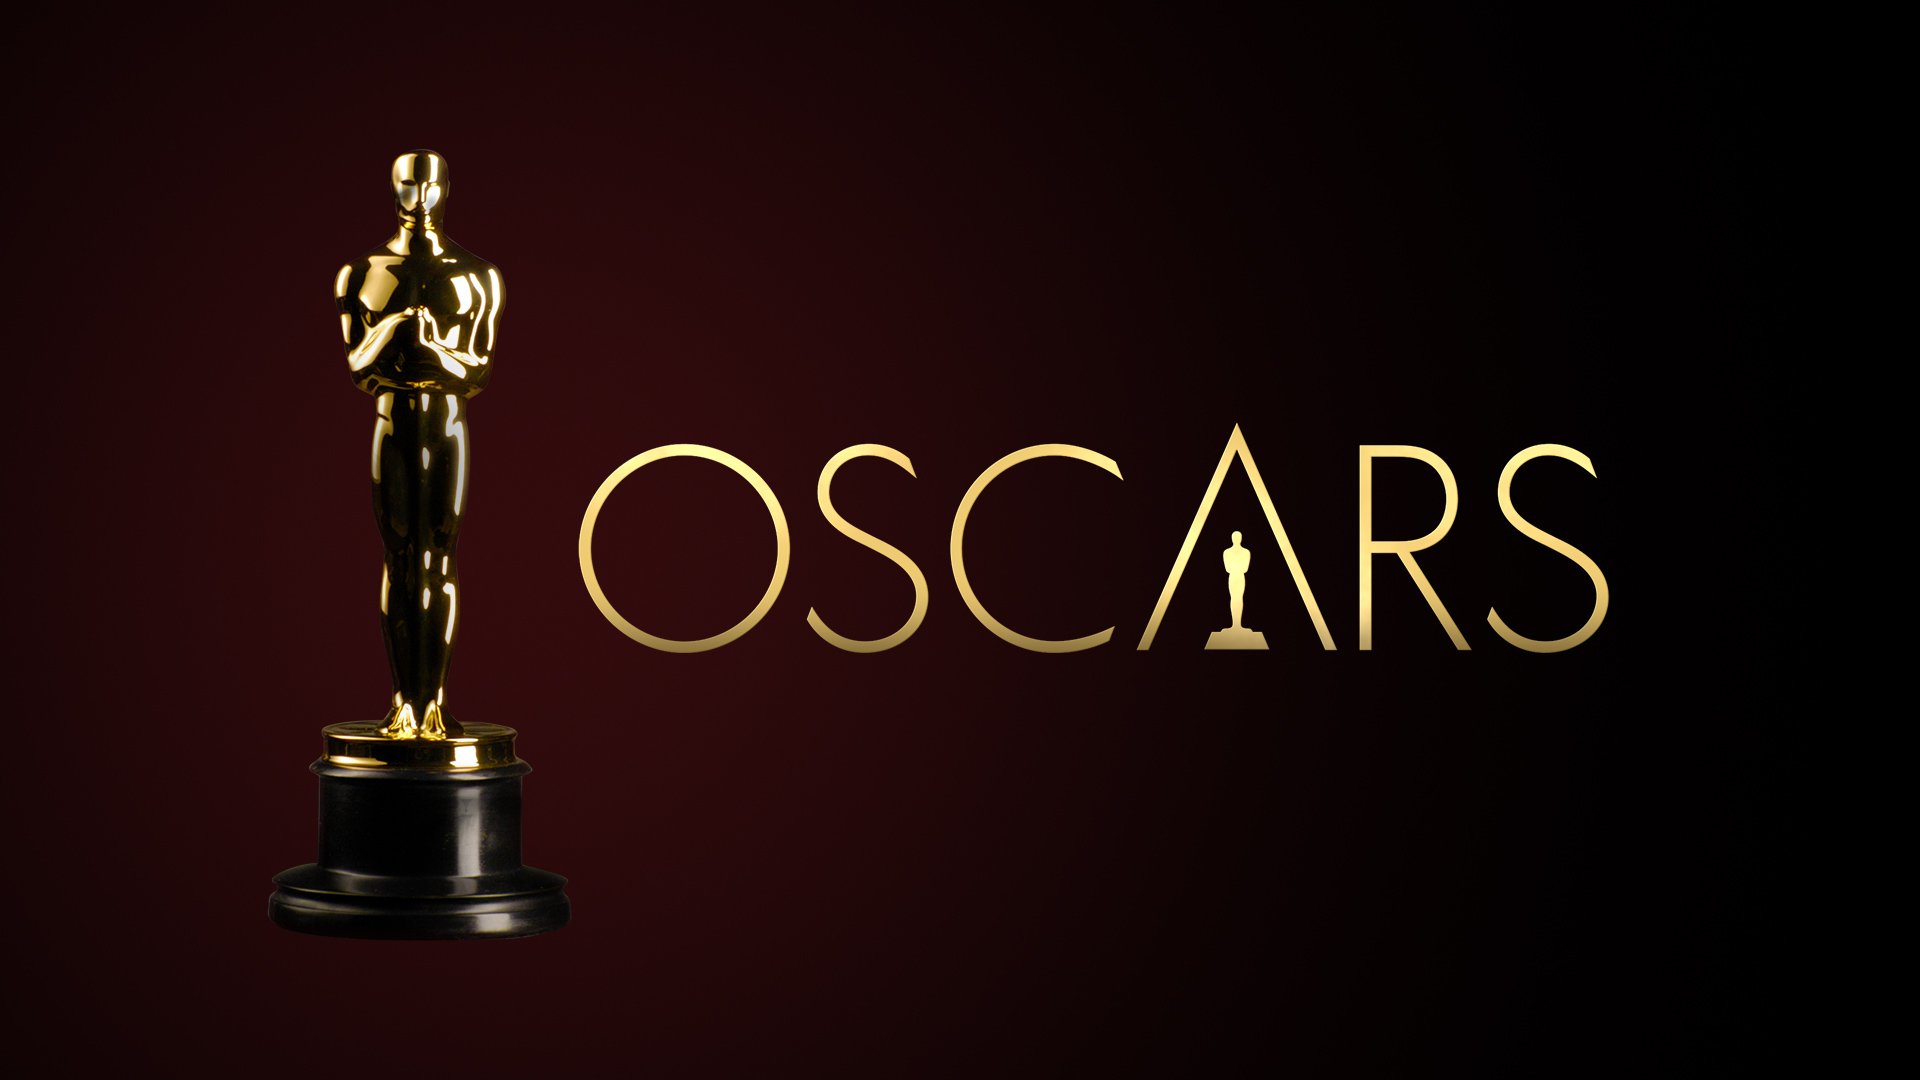 Image credit: The Academy Awards